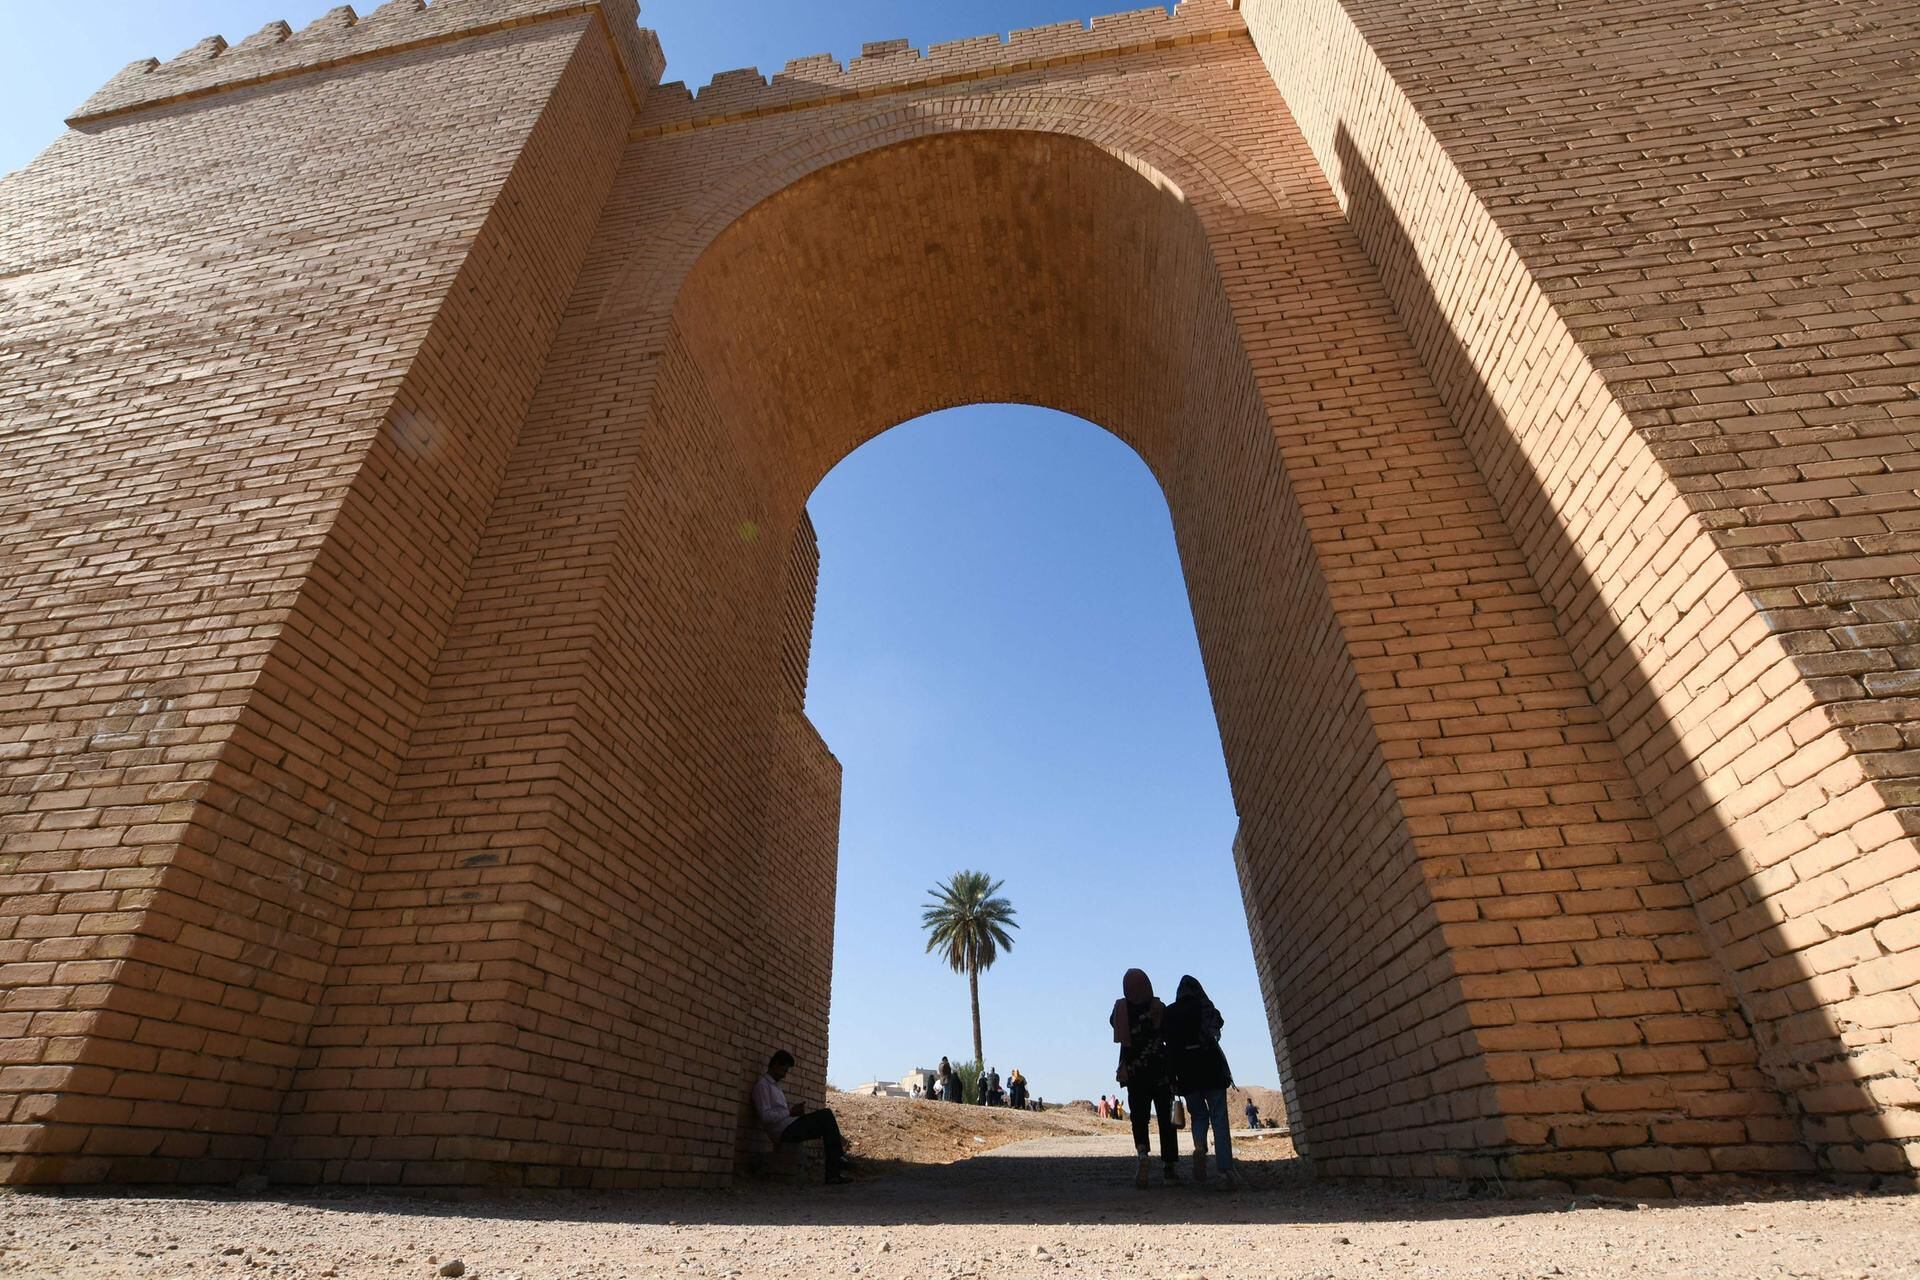 Egypt's Siwa fortress renovation boosts hopes for ecotourism